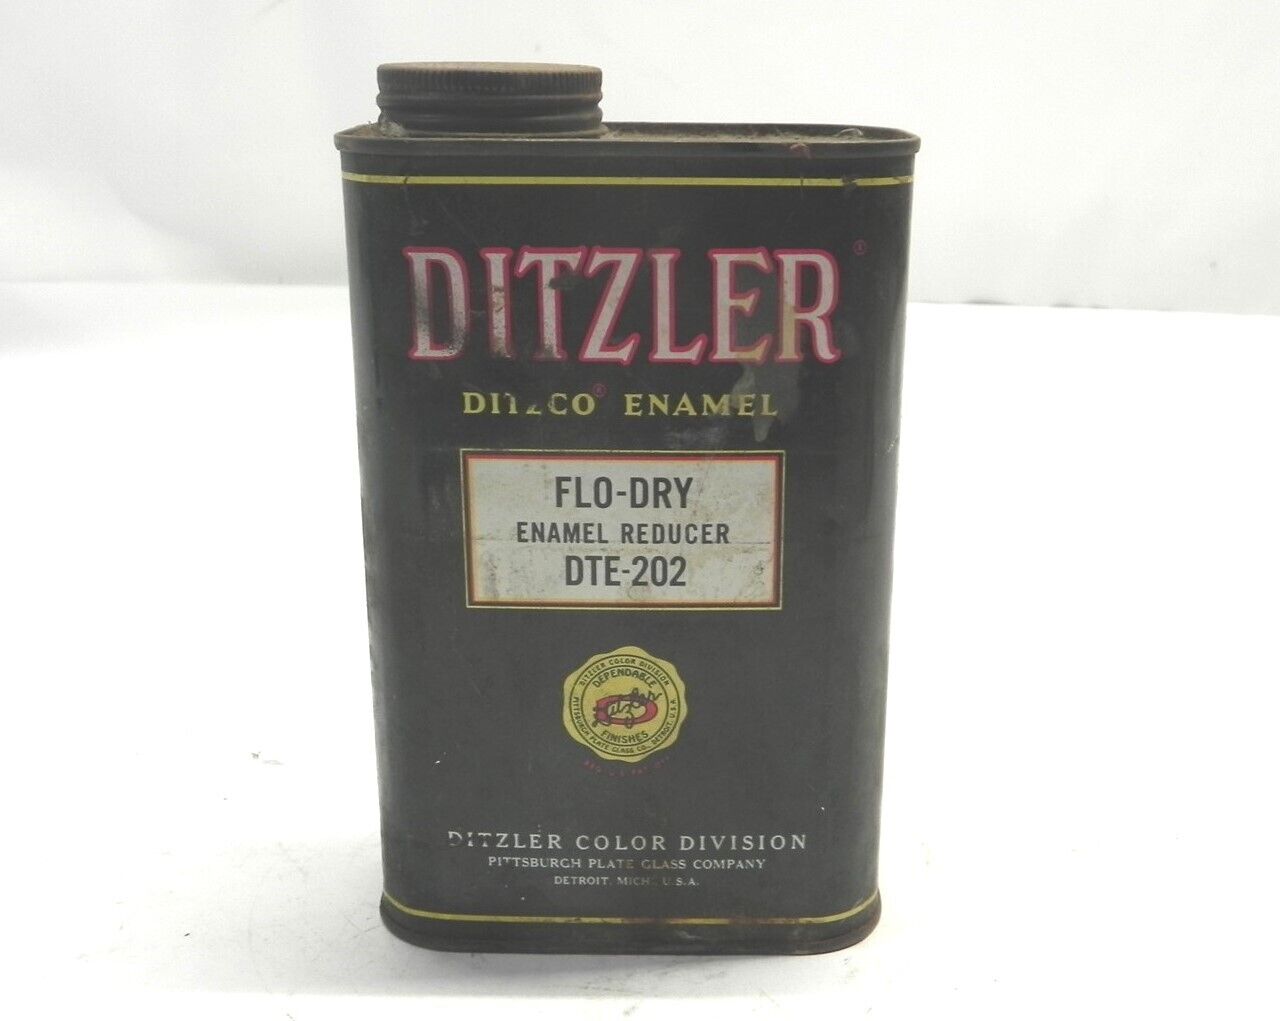 VINTAGE DITZLER FLO-DRY DTE-202 ENAMEL REDUCER 1/4 GALLON CAN EMPTY PRE-OWNED 